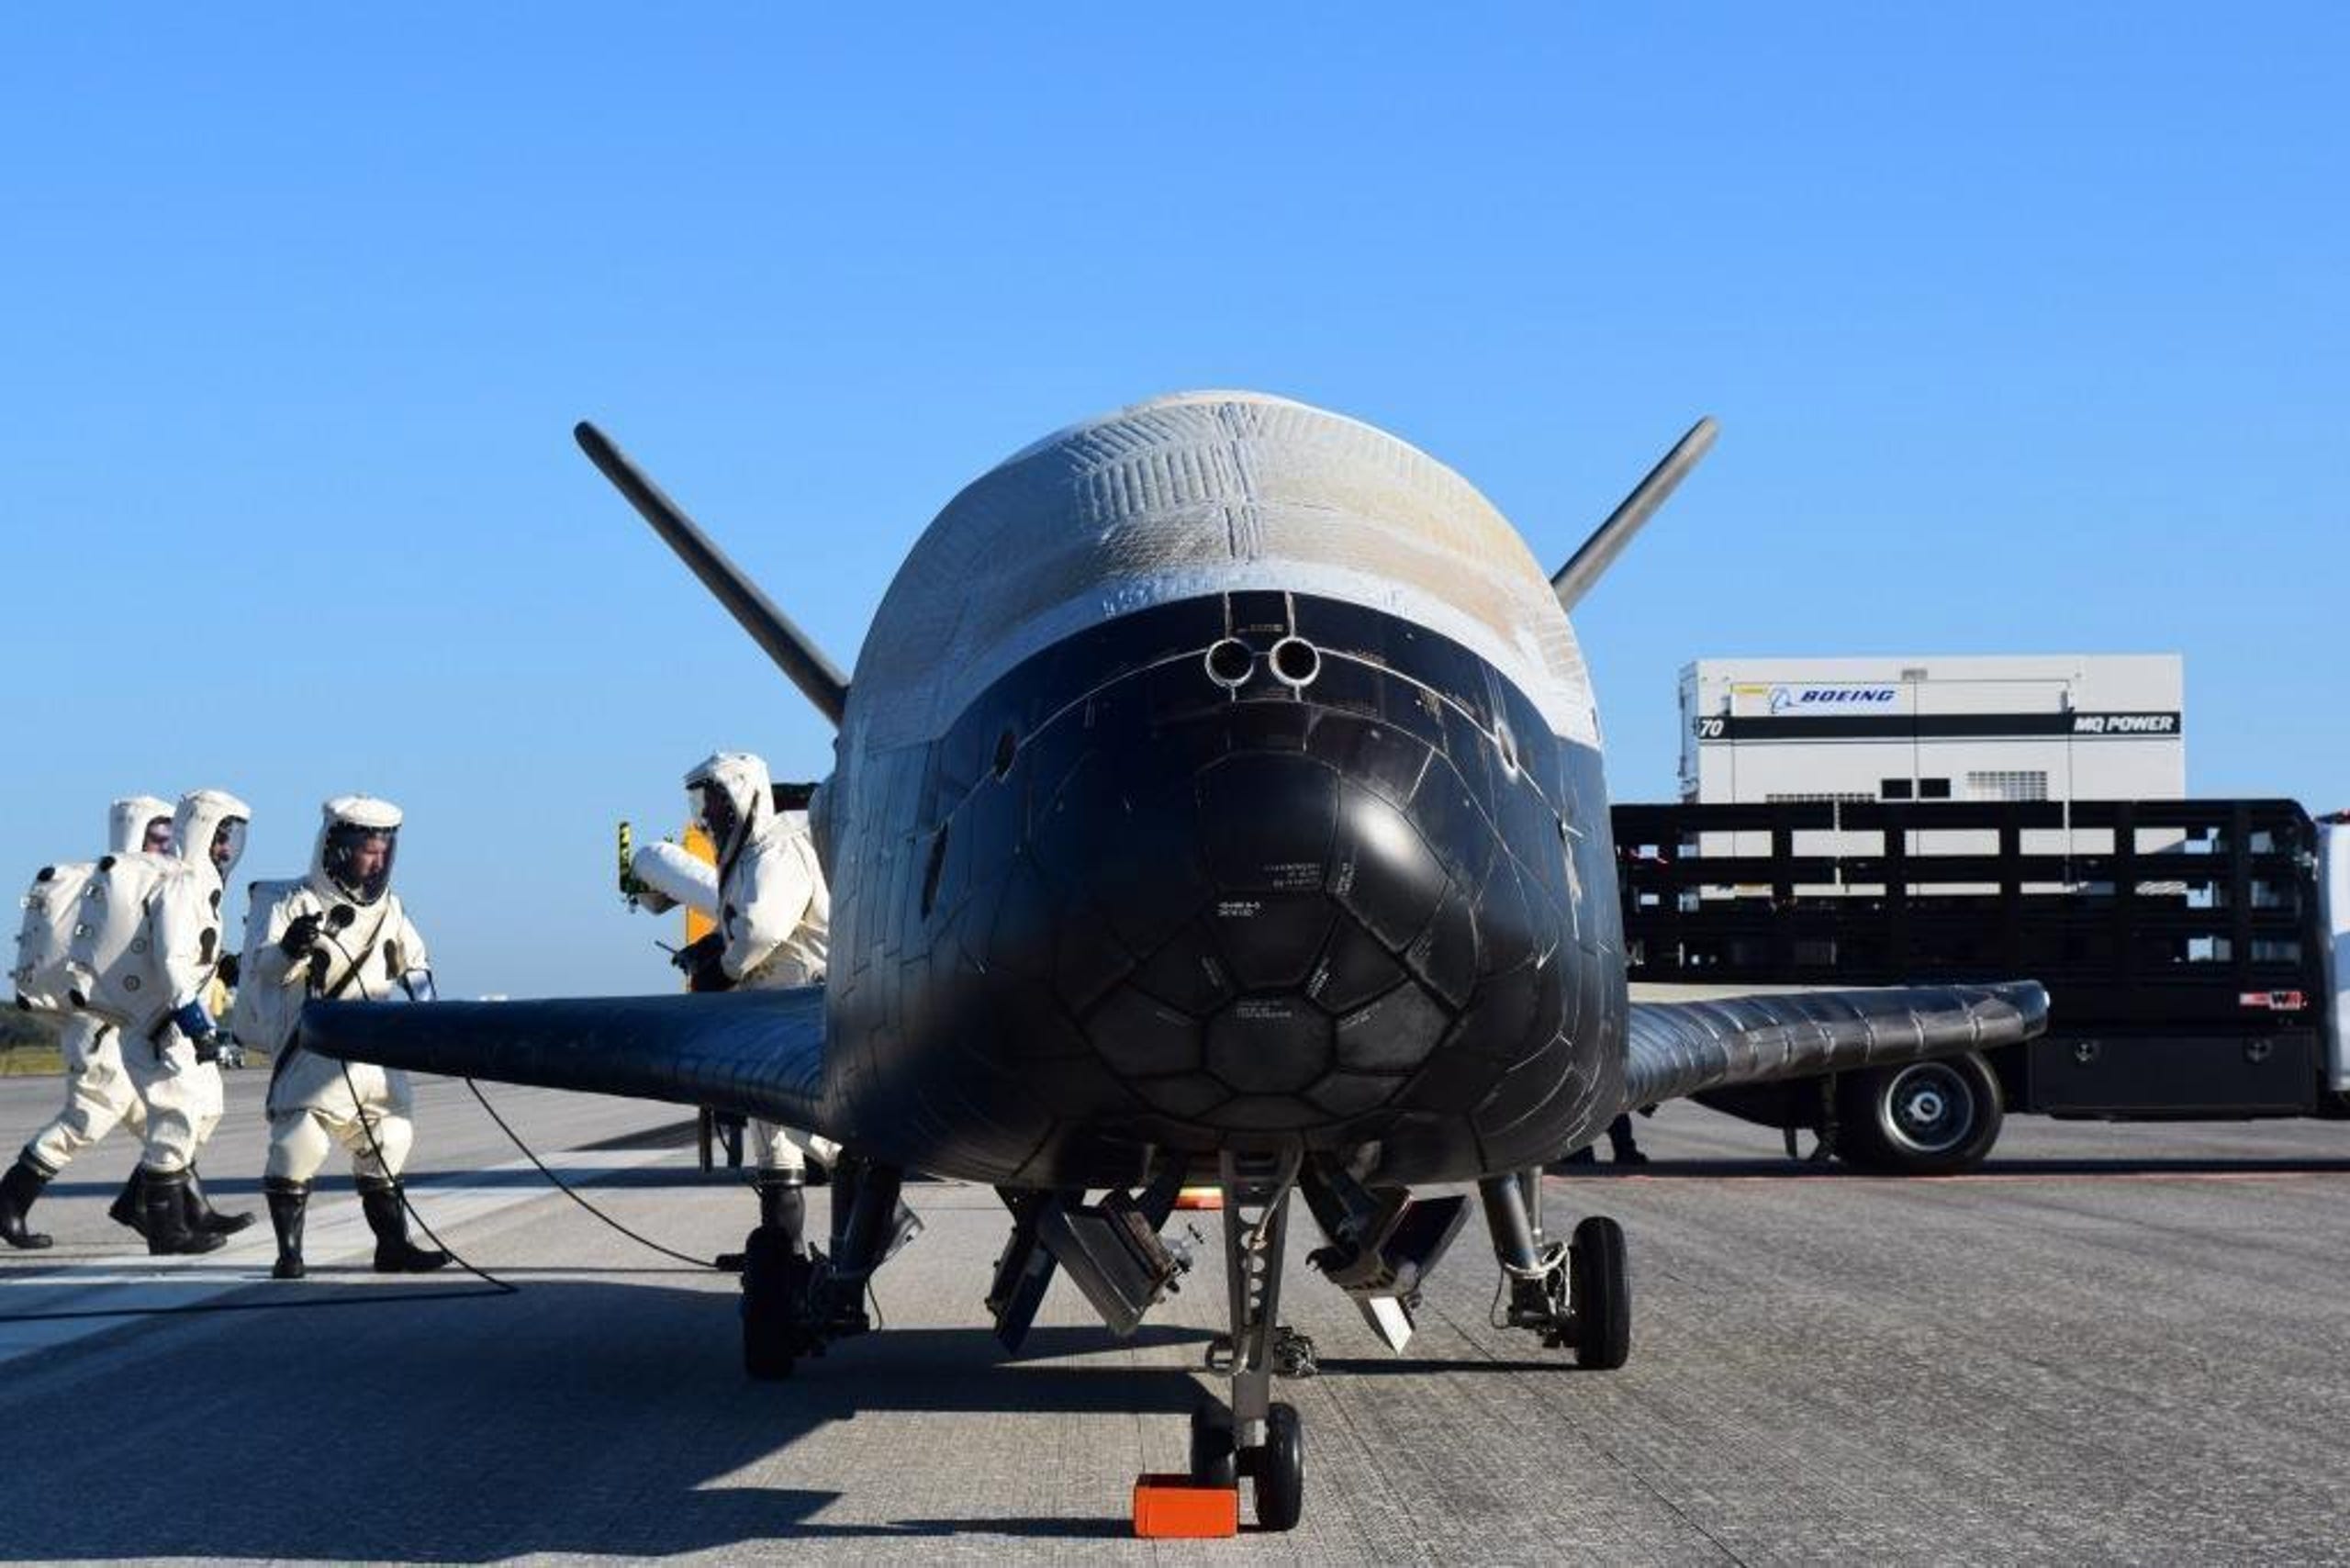 The US X-37B Orbital Test Vehicle mission 4 after landing at NASA's Kennedy Space Center Shuttle Landing Facility on May 7, 2017. According to the U.S. Air Force, the re-entry spacecraft spent more than 700 days in space.